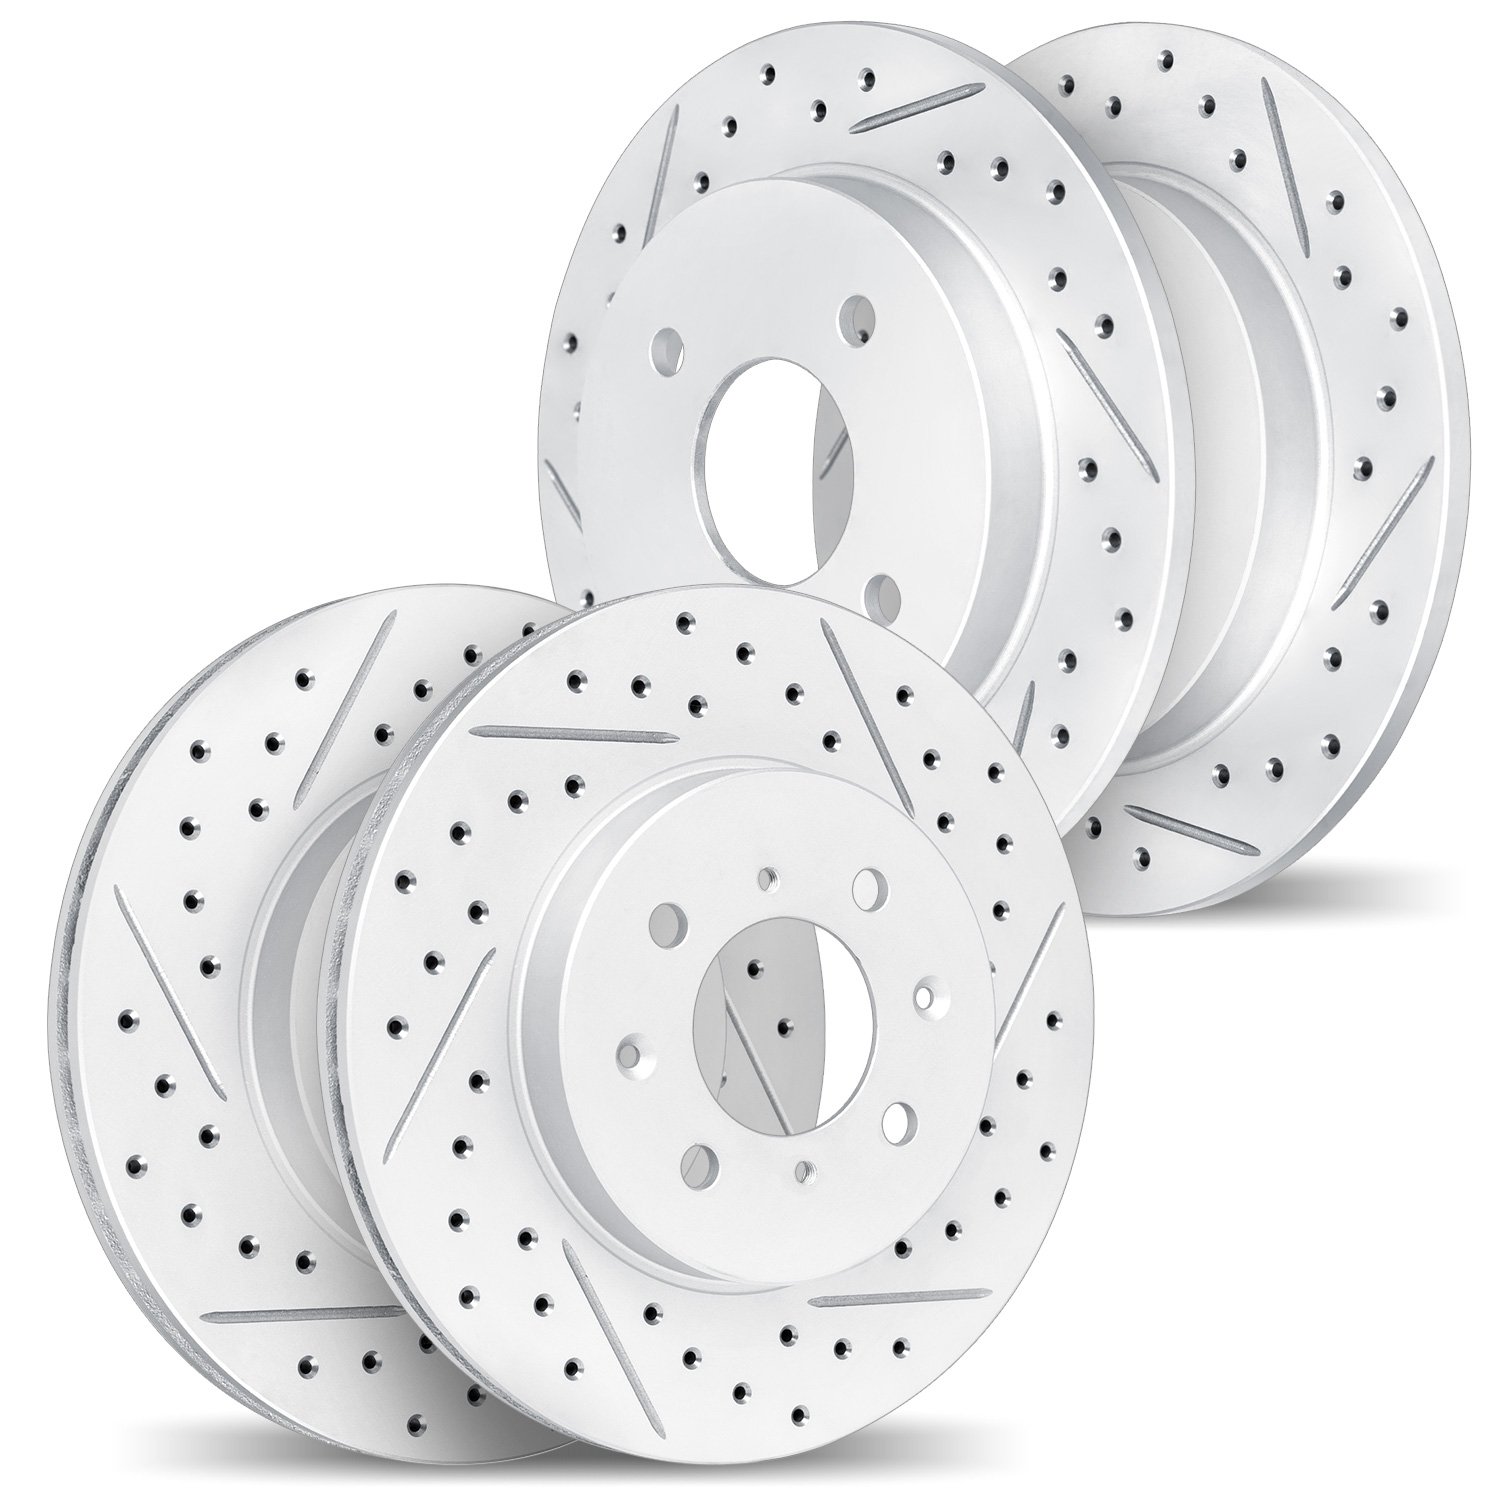 2004-80030 Geoperformance Drilled/Slotted Brake Rotors, 1990-1993 Ford/Lincoln/Mercury/Mazda, Position: Front and Rear